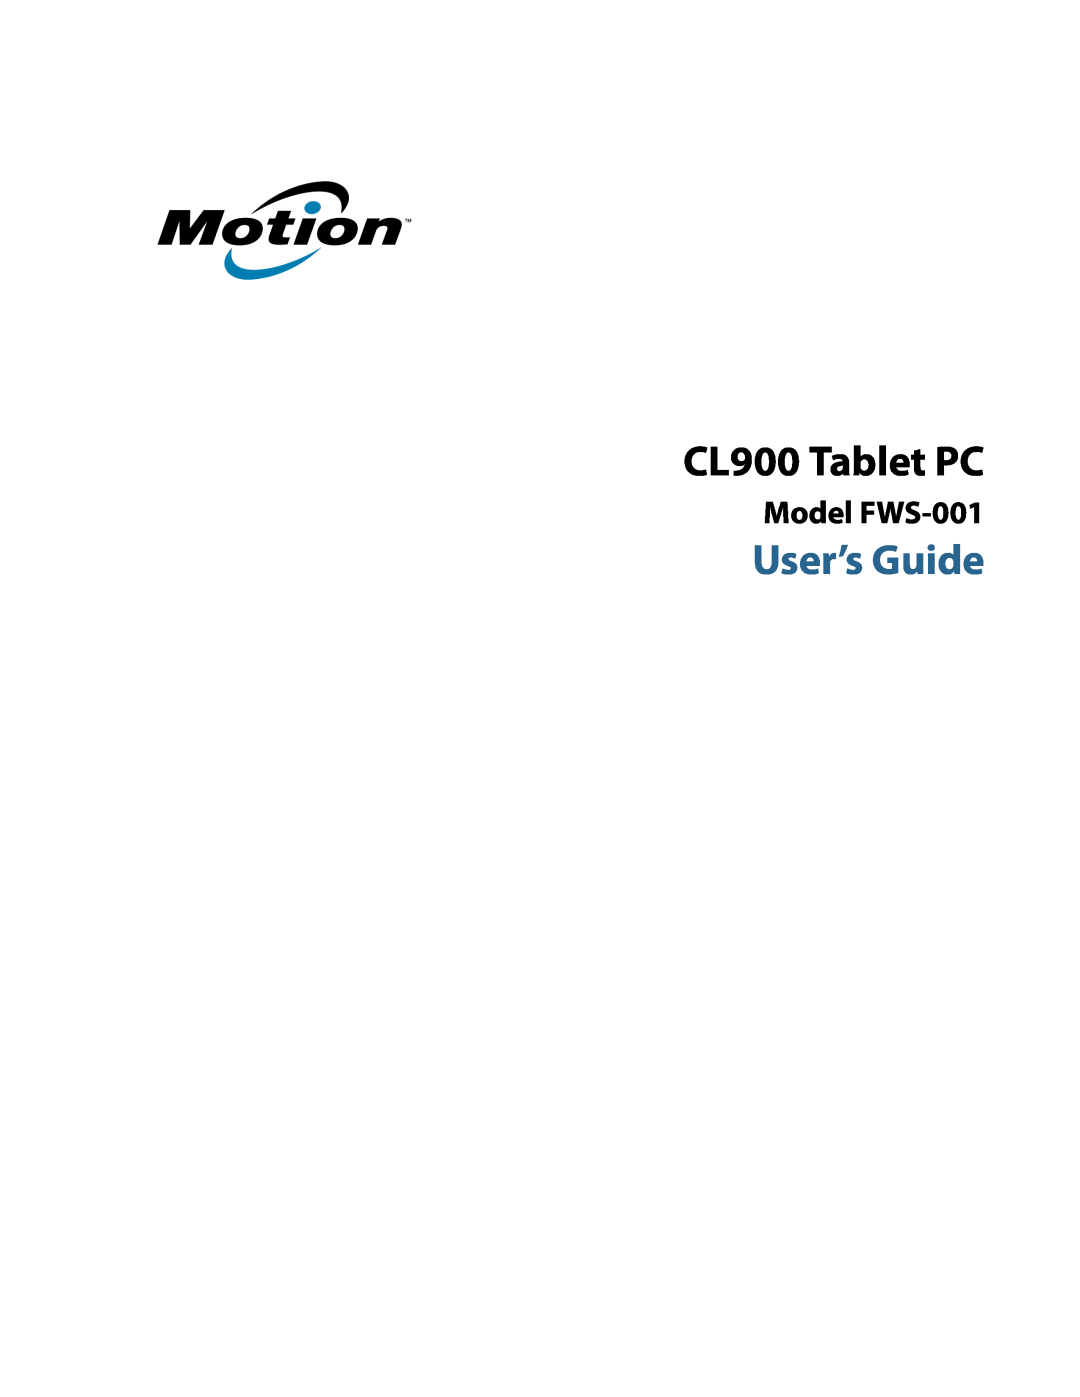 Motion warranty CL900 Tablet PC, Model FWS-001, Important Product Information 